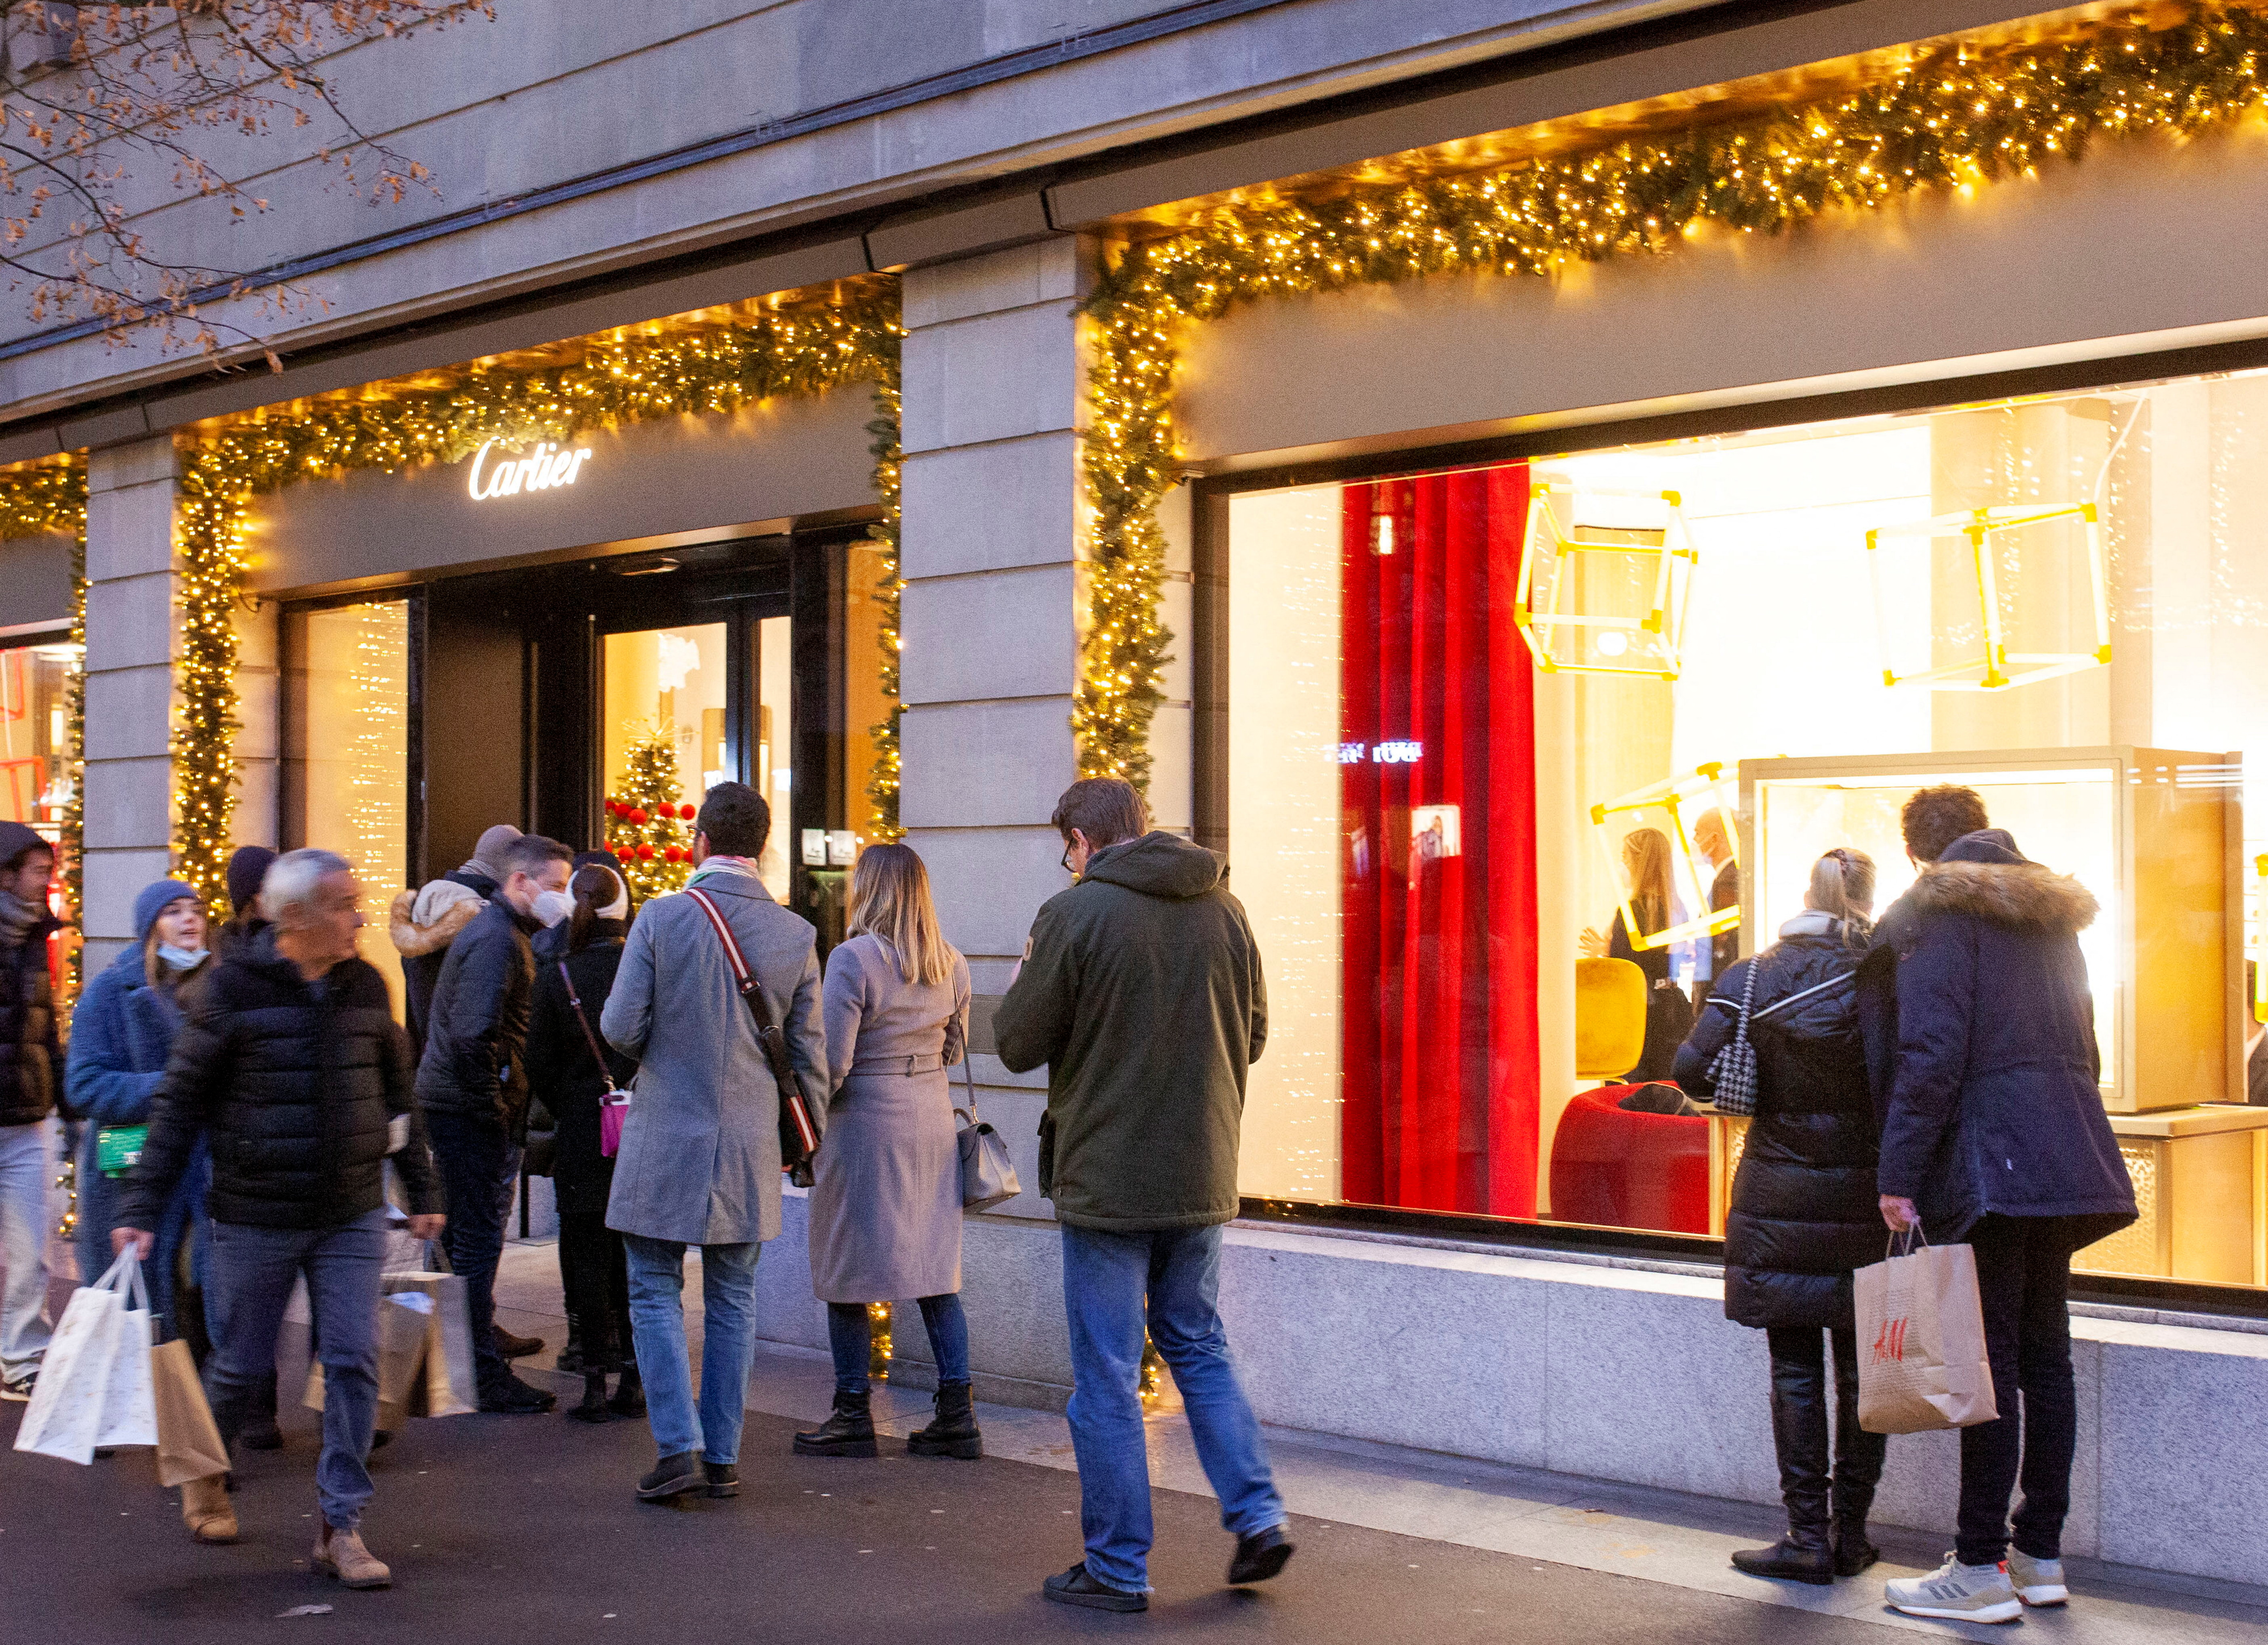 Shoppers are seen in front of a Cartier store in Zurich